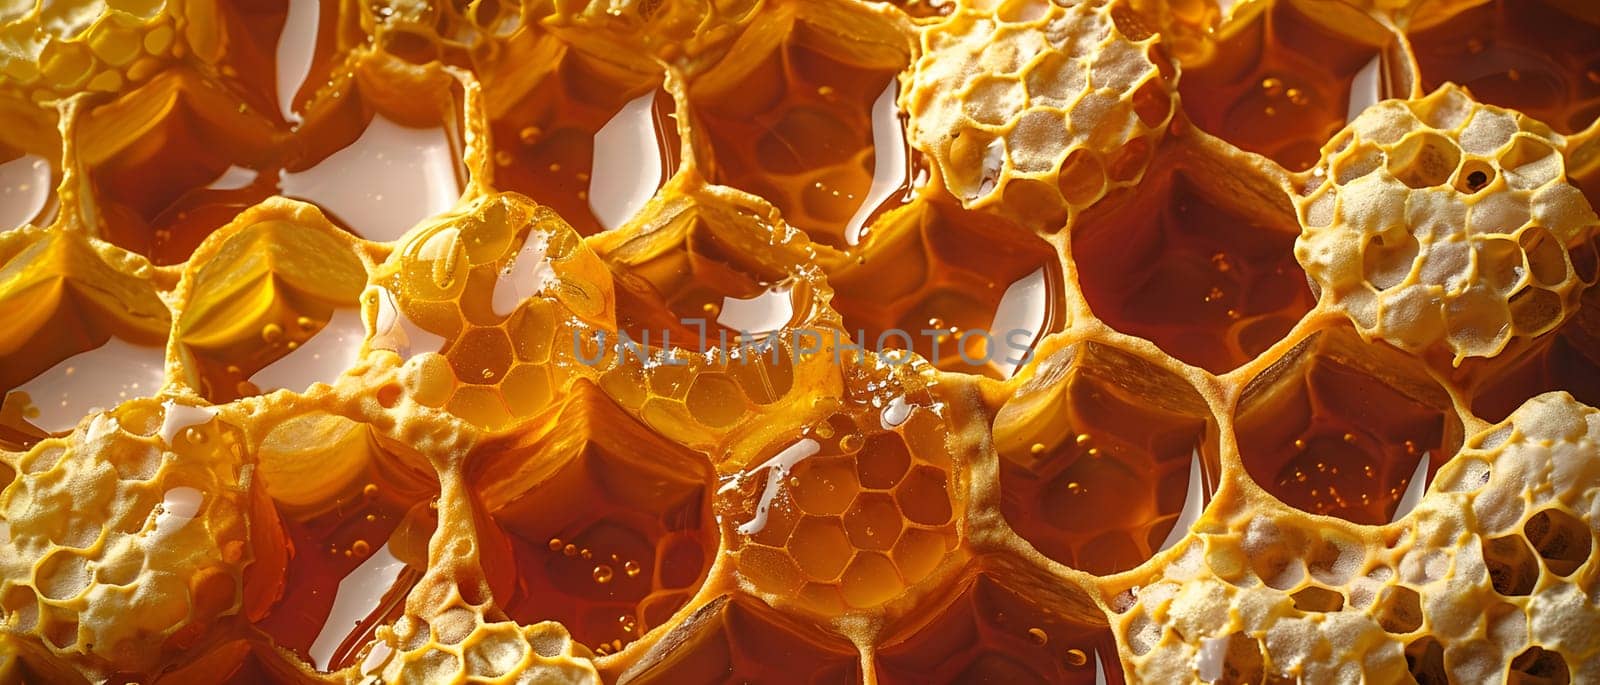 a close up of a honeycomb filled with honey by Nadtochiy